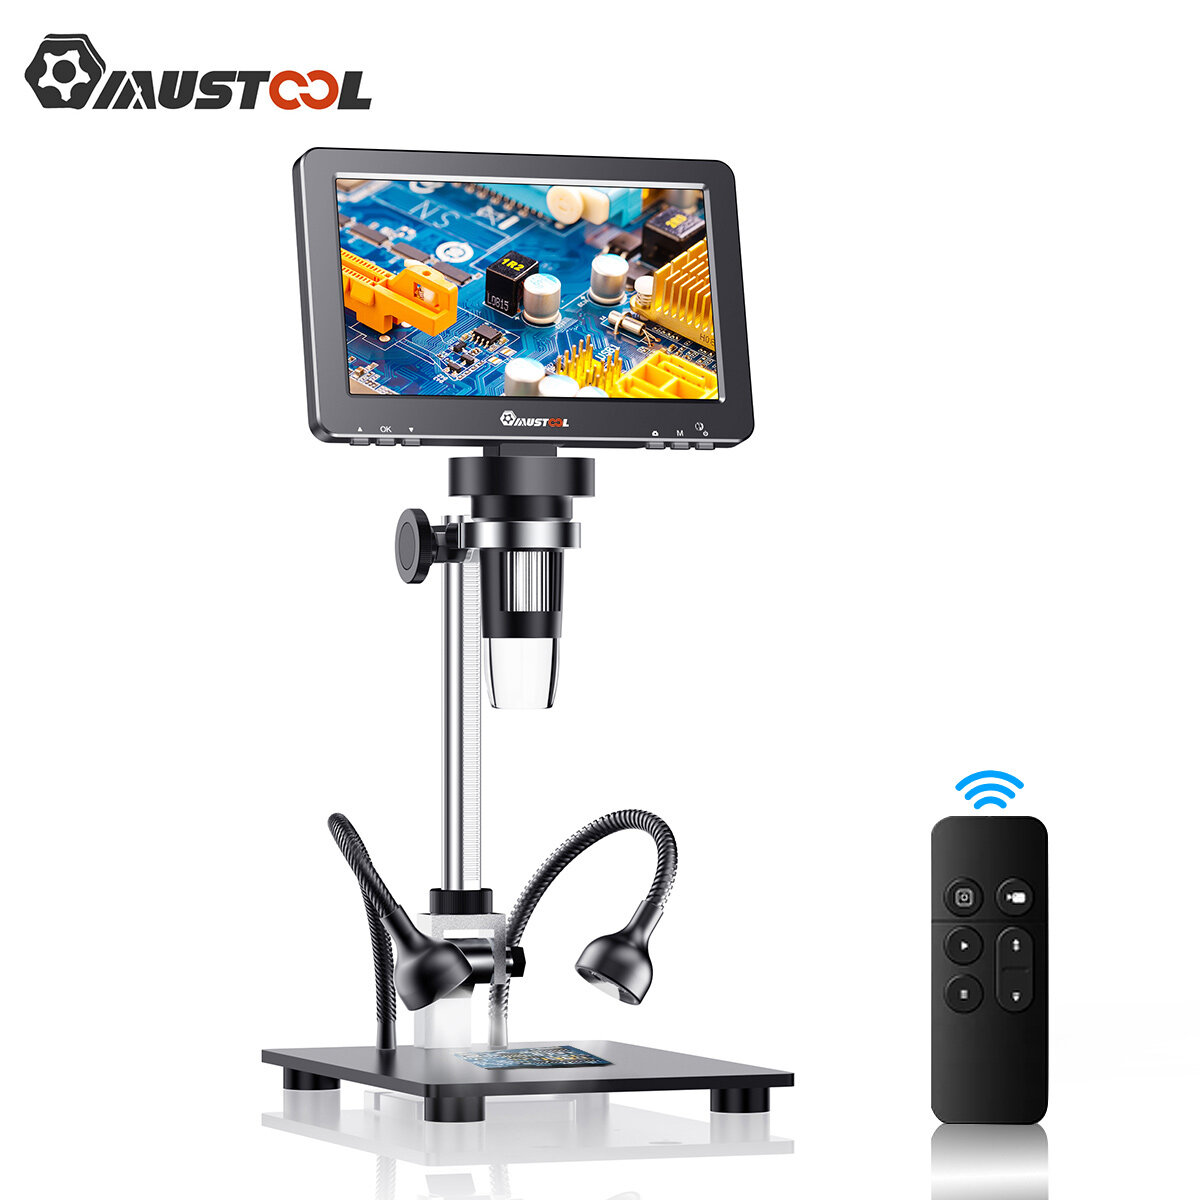 Image of MUSTOOL DM9 Pro HDMI-compatible Digital Microscope w/eflect cover 7'' IPS Screen Microscopes 1200X Entire Coin View 16MP